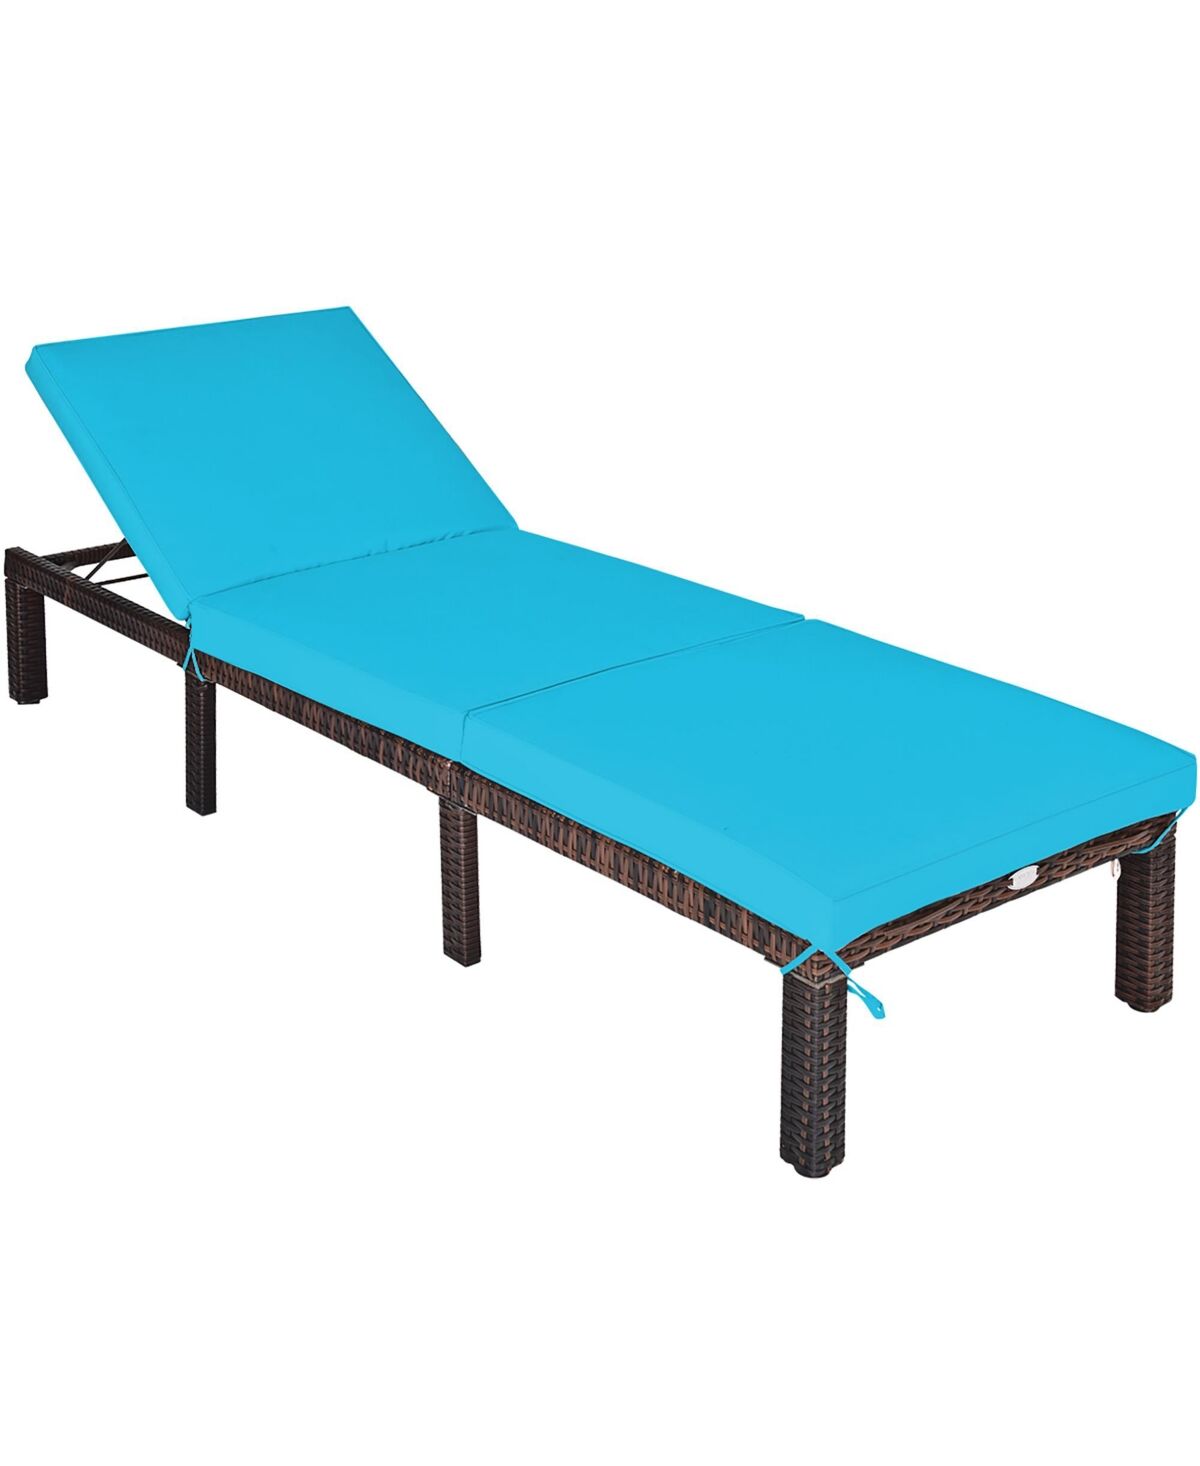 Costway Outdoor Rattan Lounge Chair Chaise Recliner Adjustable Cushioned Patio - Turquoise/aqua